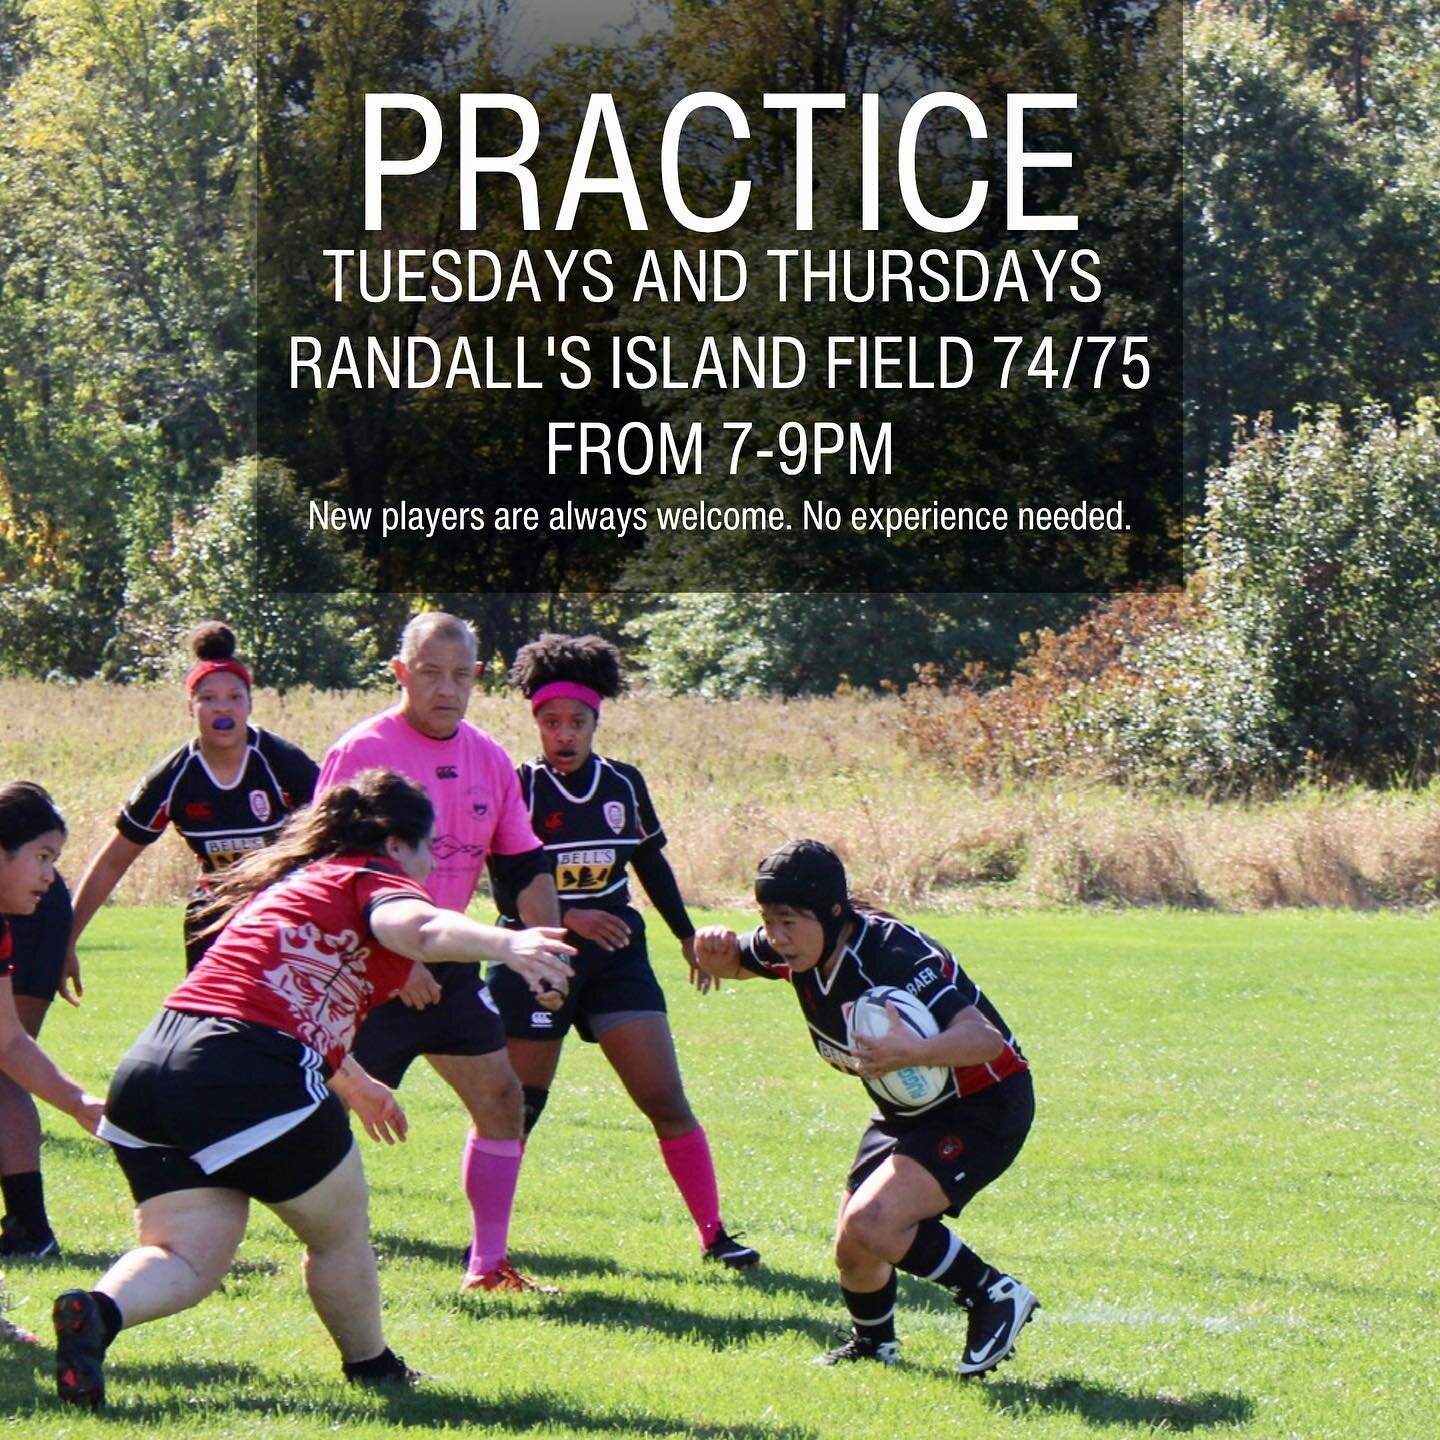 Tonight! Practice every Tuesdays and Thursdays for both teams! No experience needed. New players are always welcome!
#nyrugby #rugby #igr